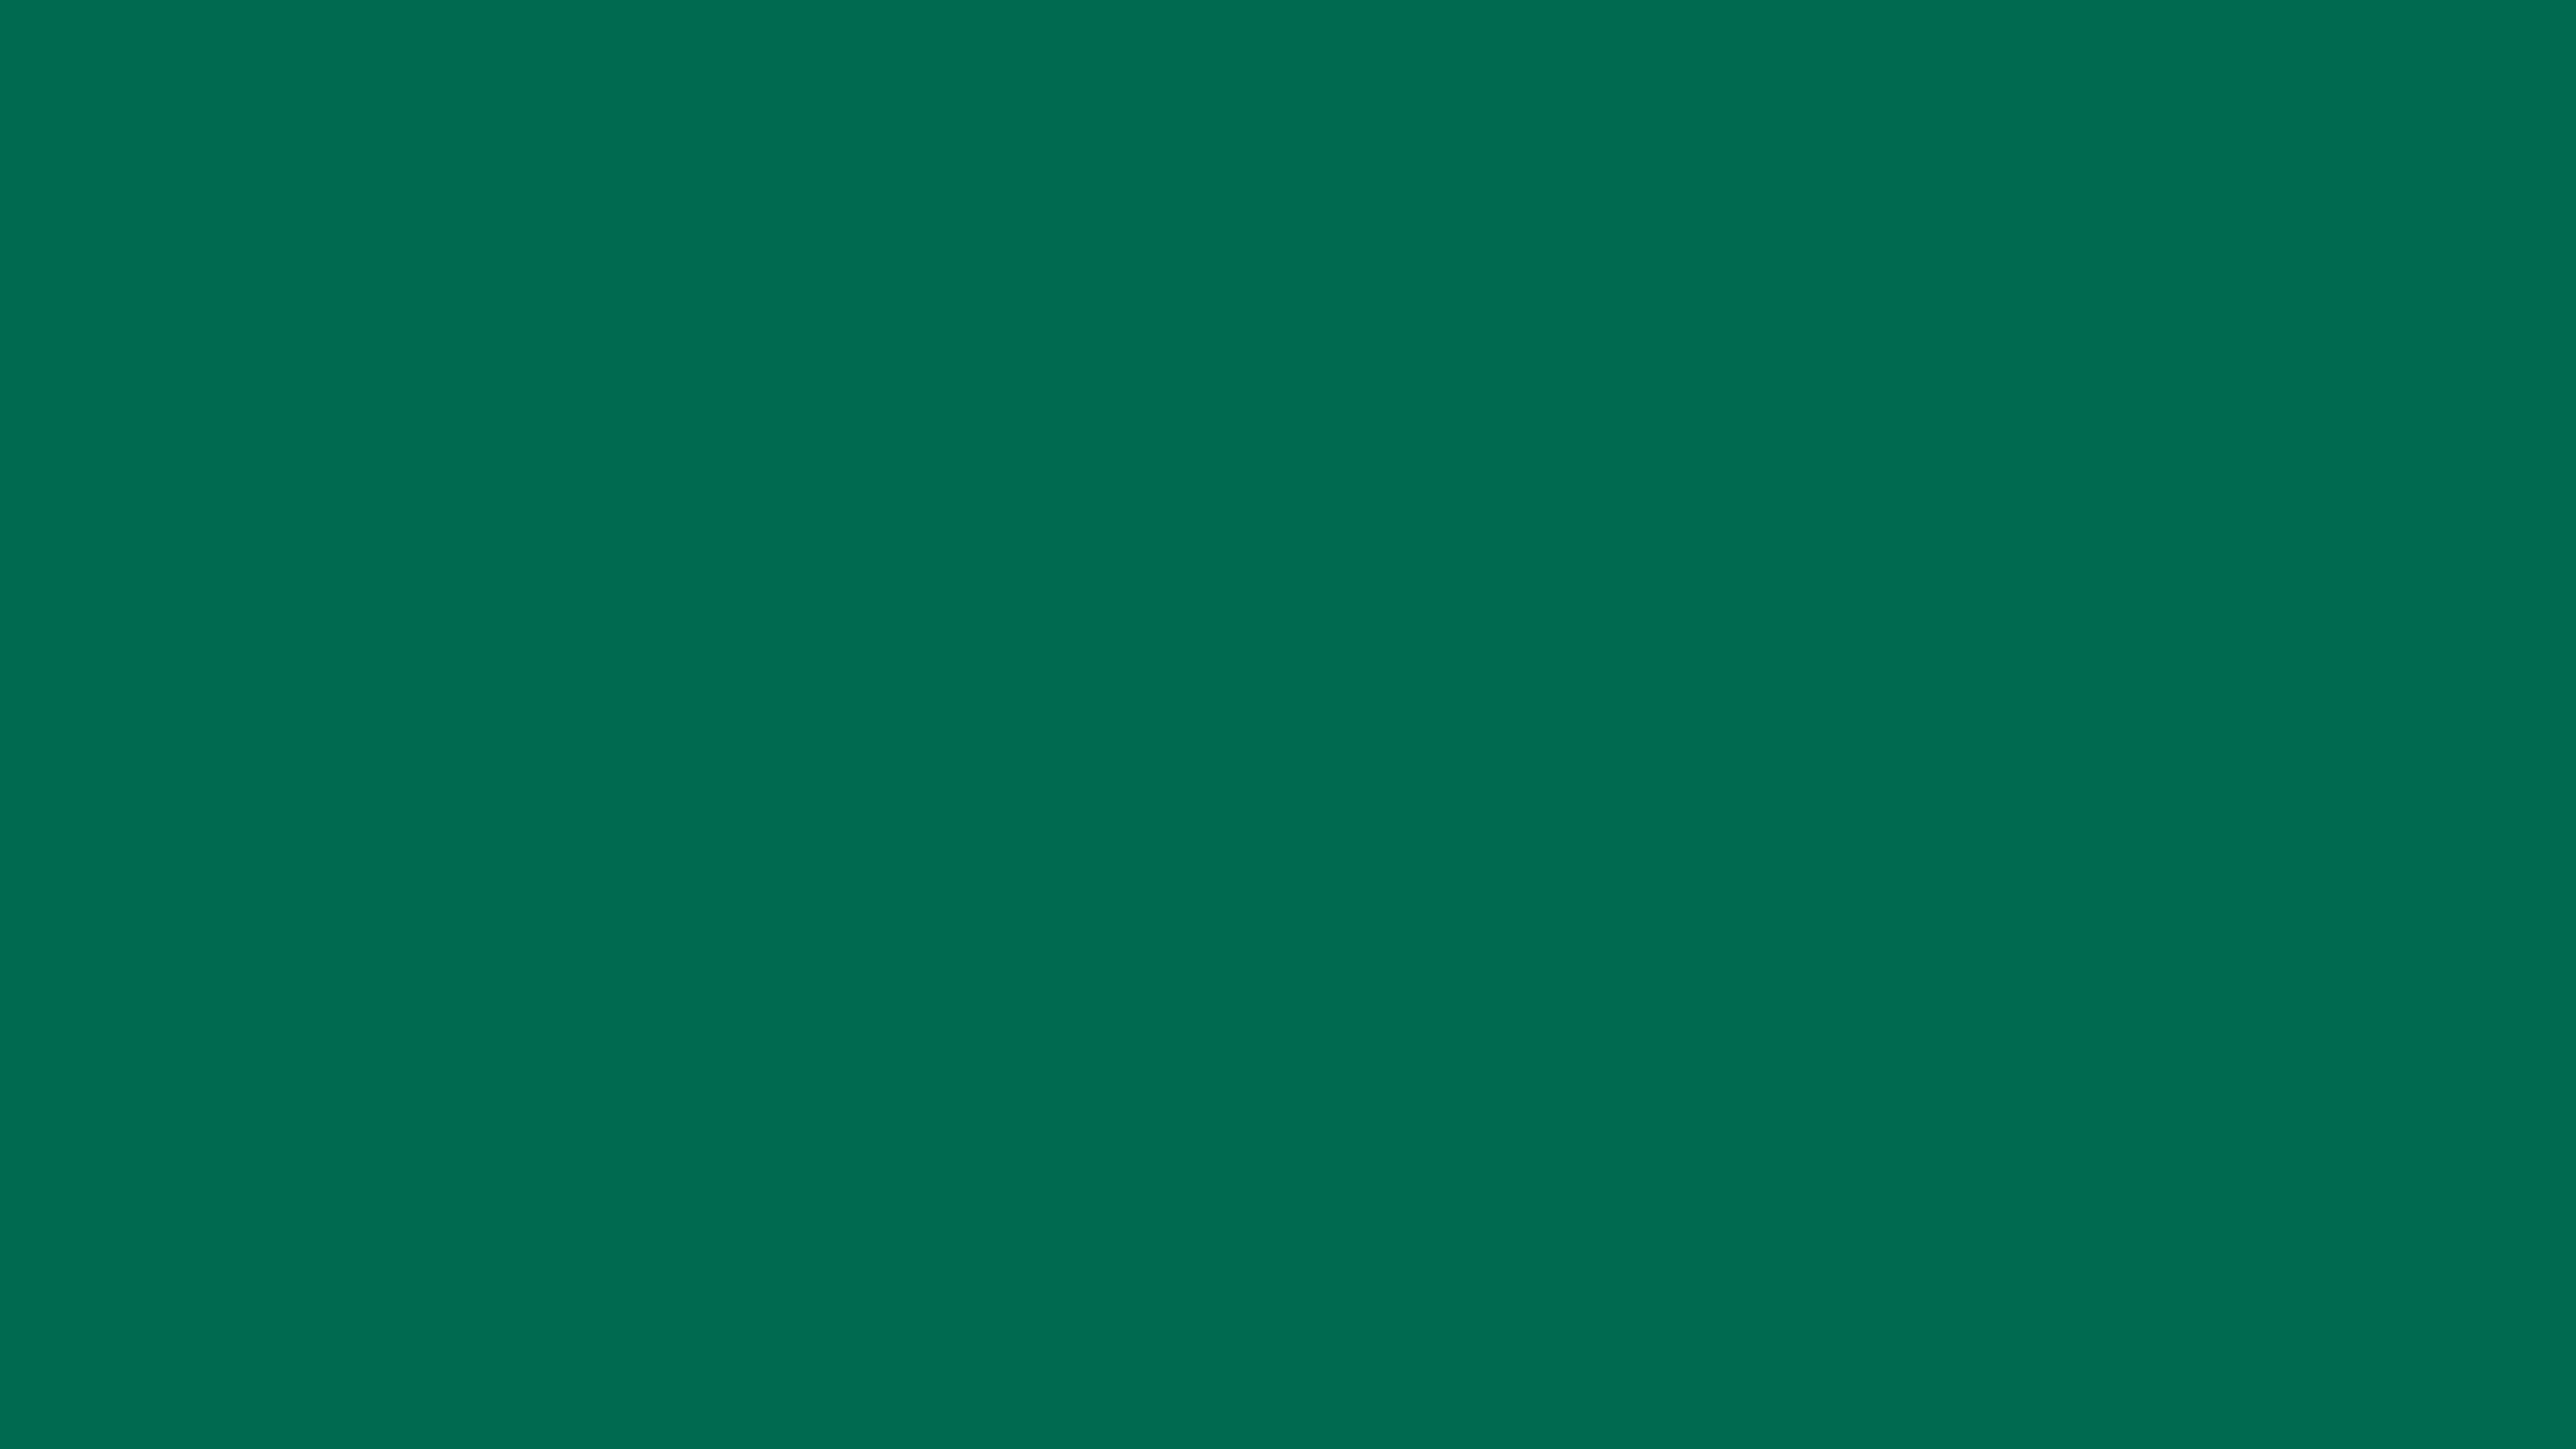 Peacock Green Solid Color Background Image | Free Image Generator